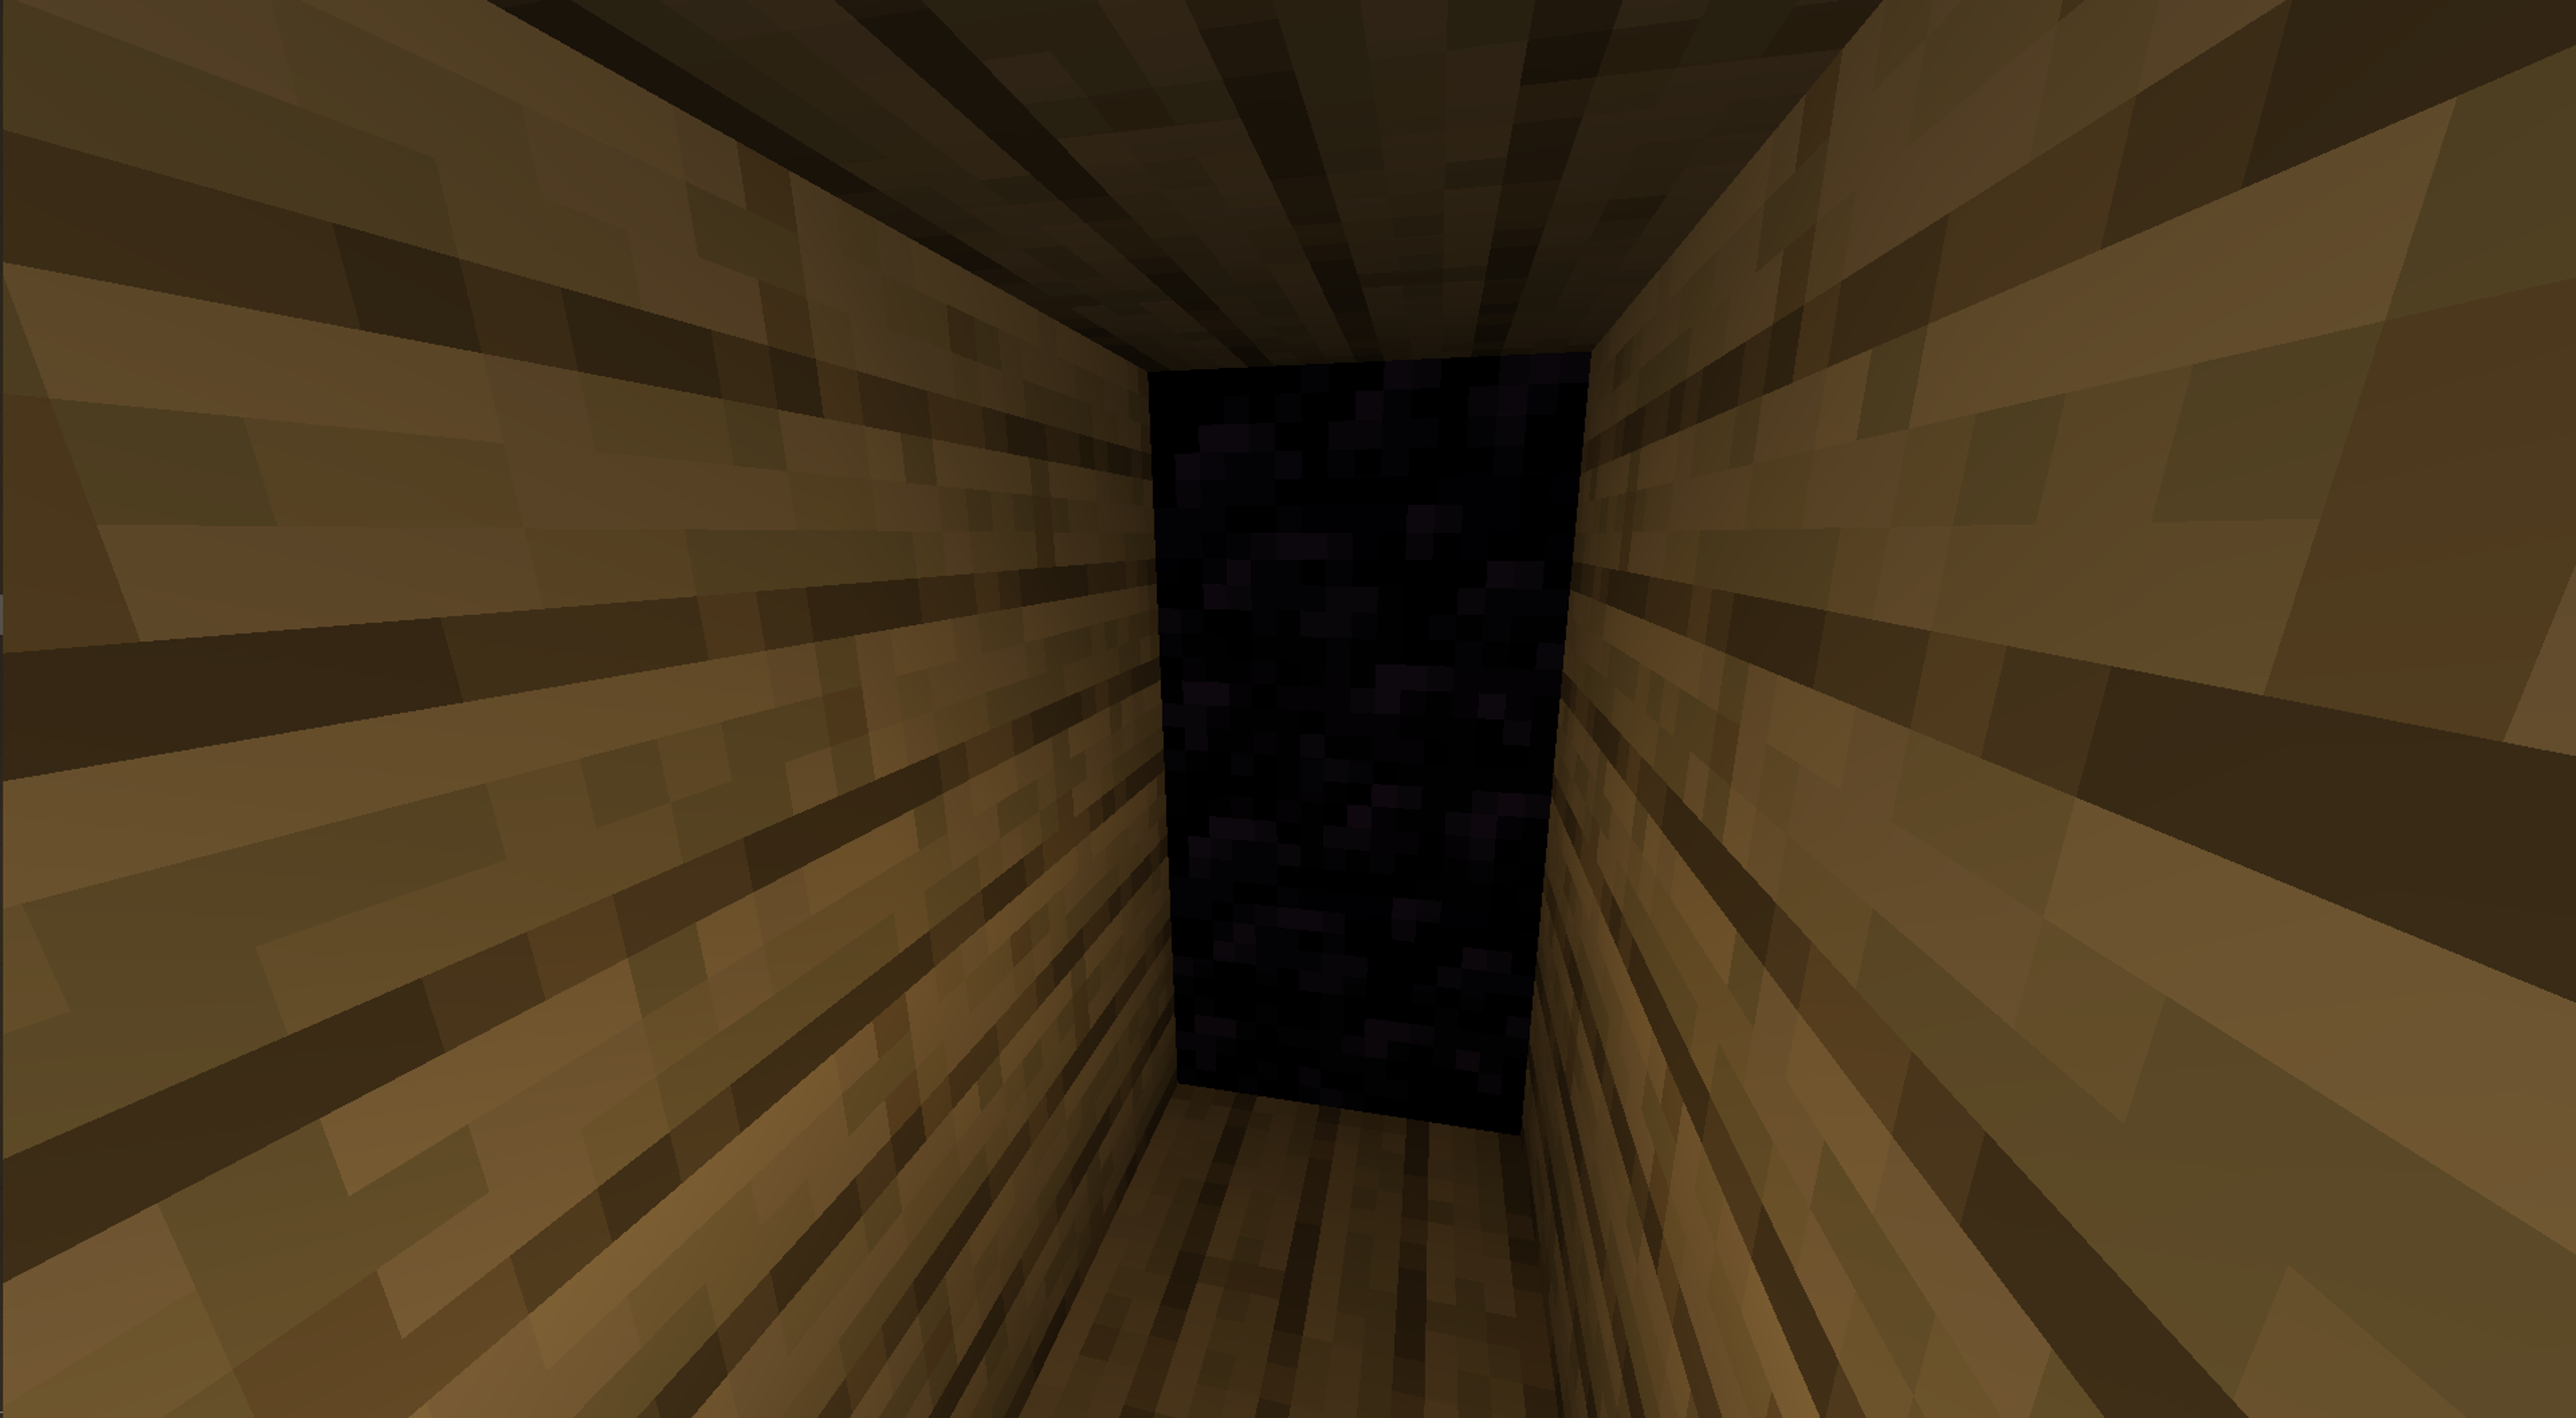 A hallway blocked off with obsidian